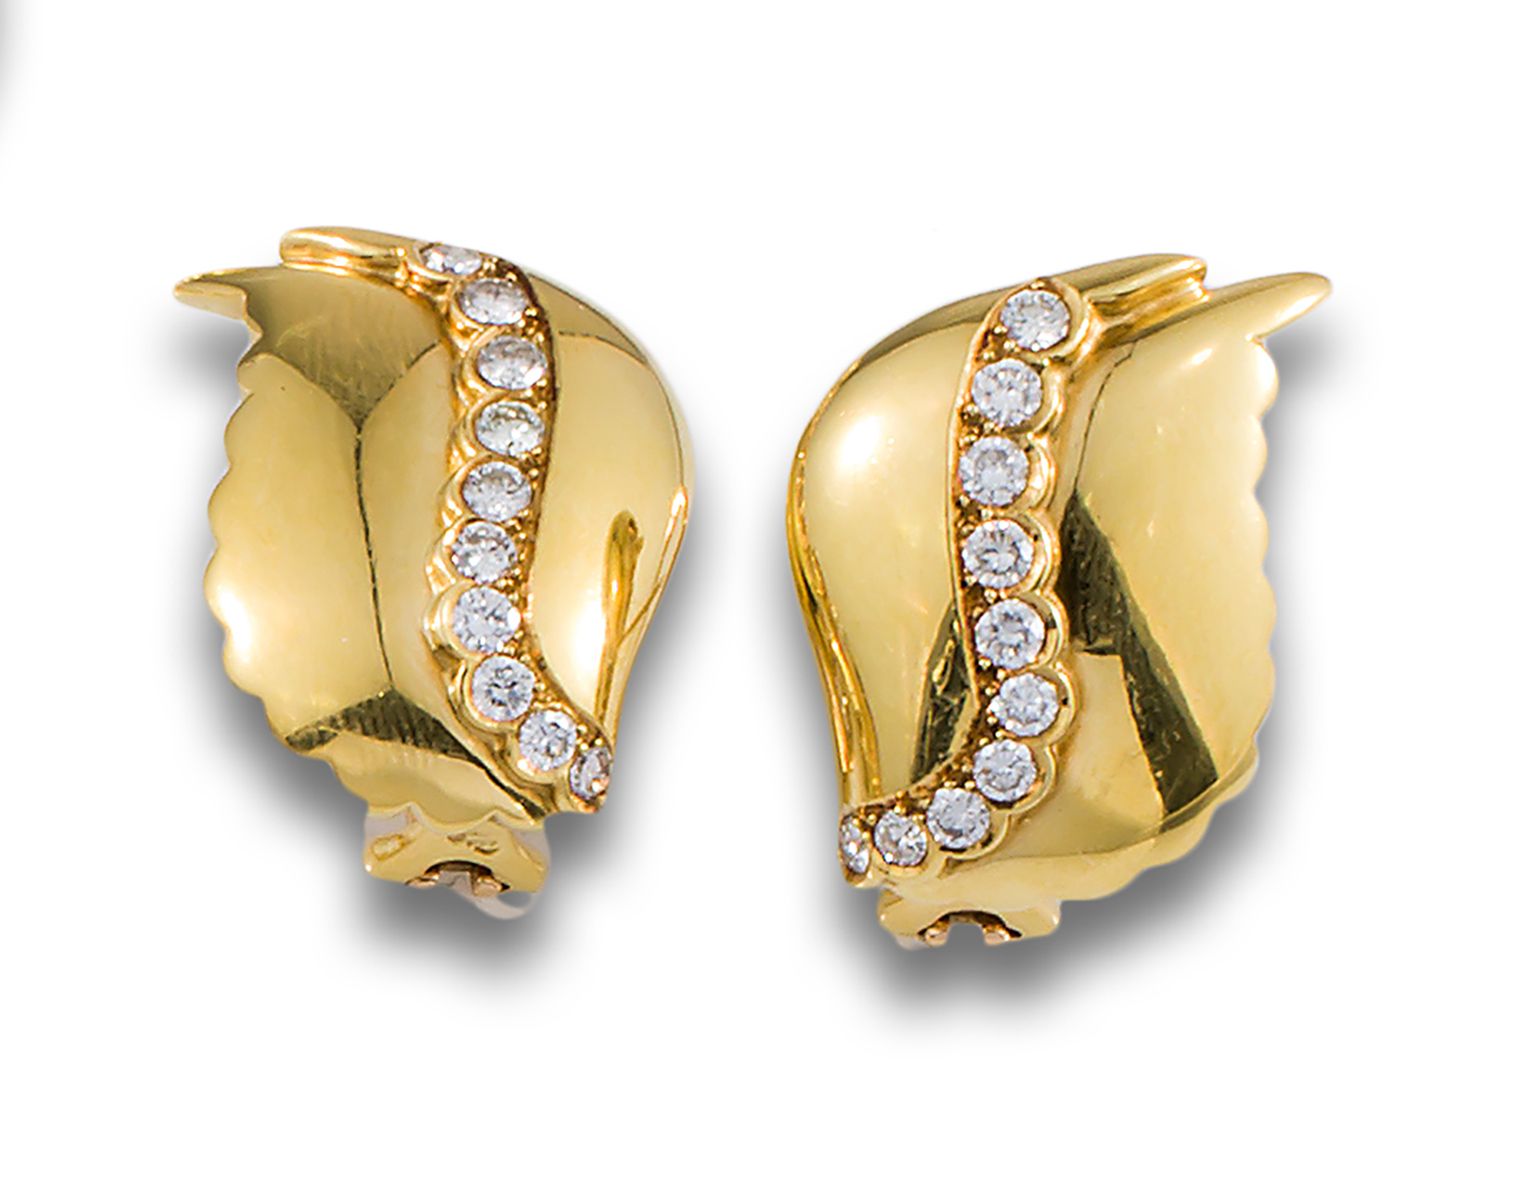 GOLD LEAF EARRINGS WITH DIAMONDS ANSORENA leaf design earrings, 18kt yellow gold&hellip;